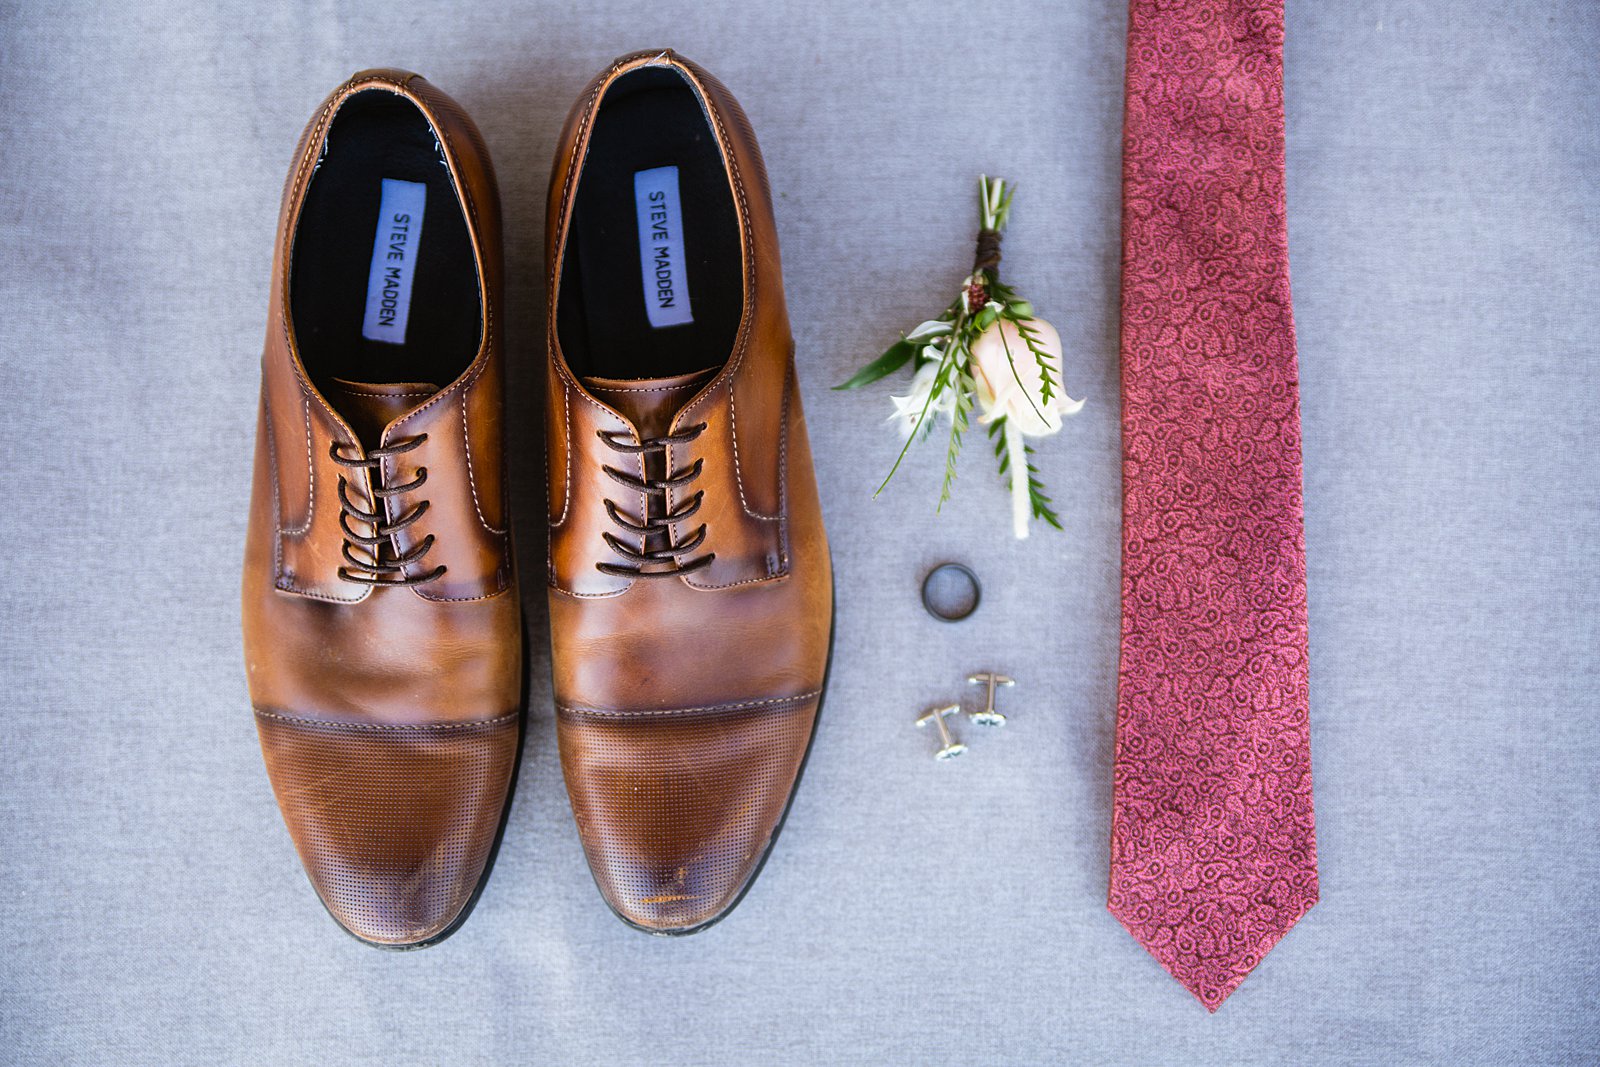 Groom's wedding day details of tan shoes, boutonniere, wedding band, cufflinks, and red copper tie by PMA Photography.